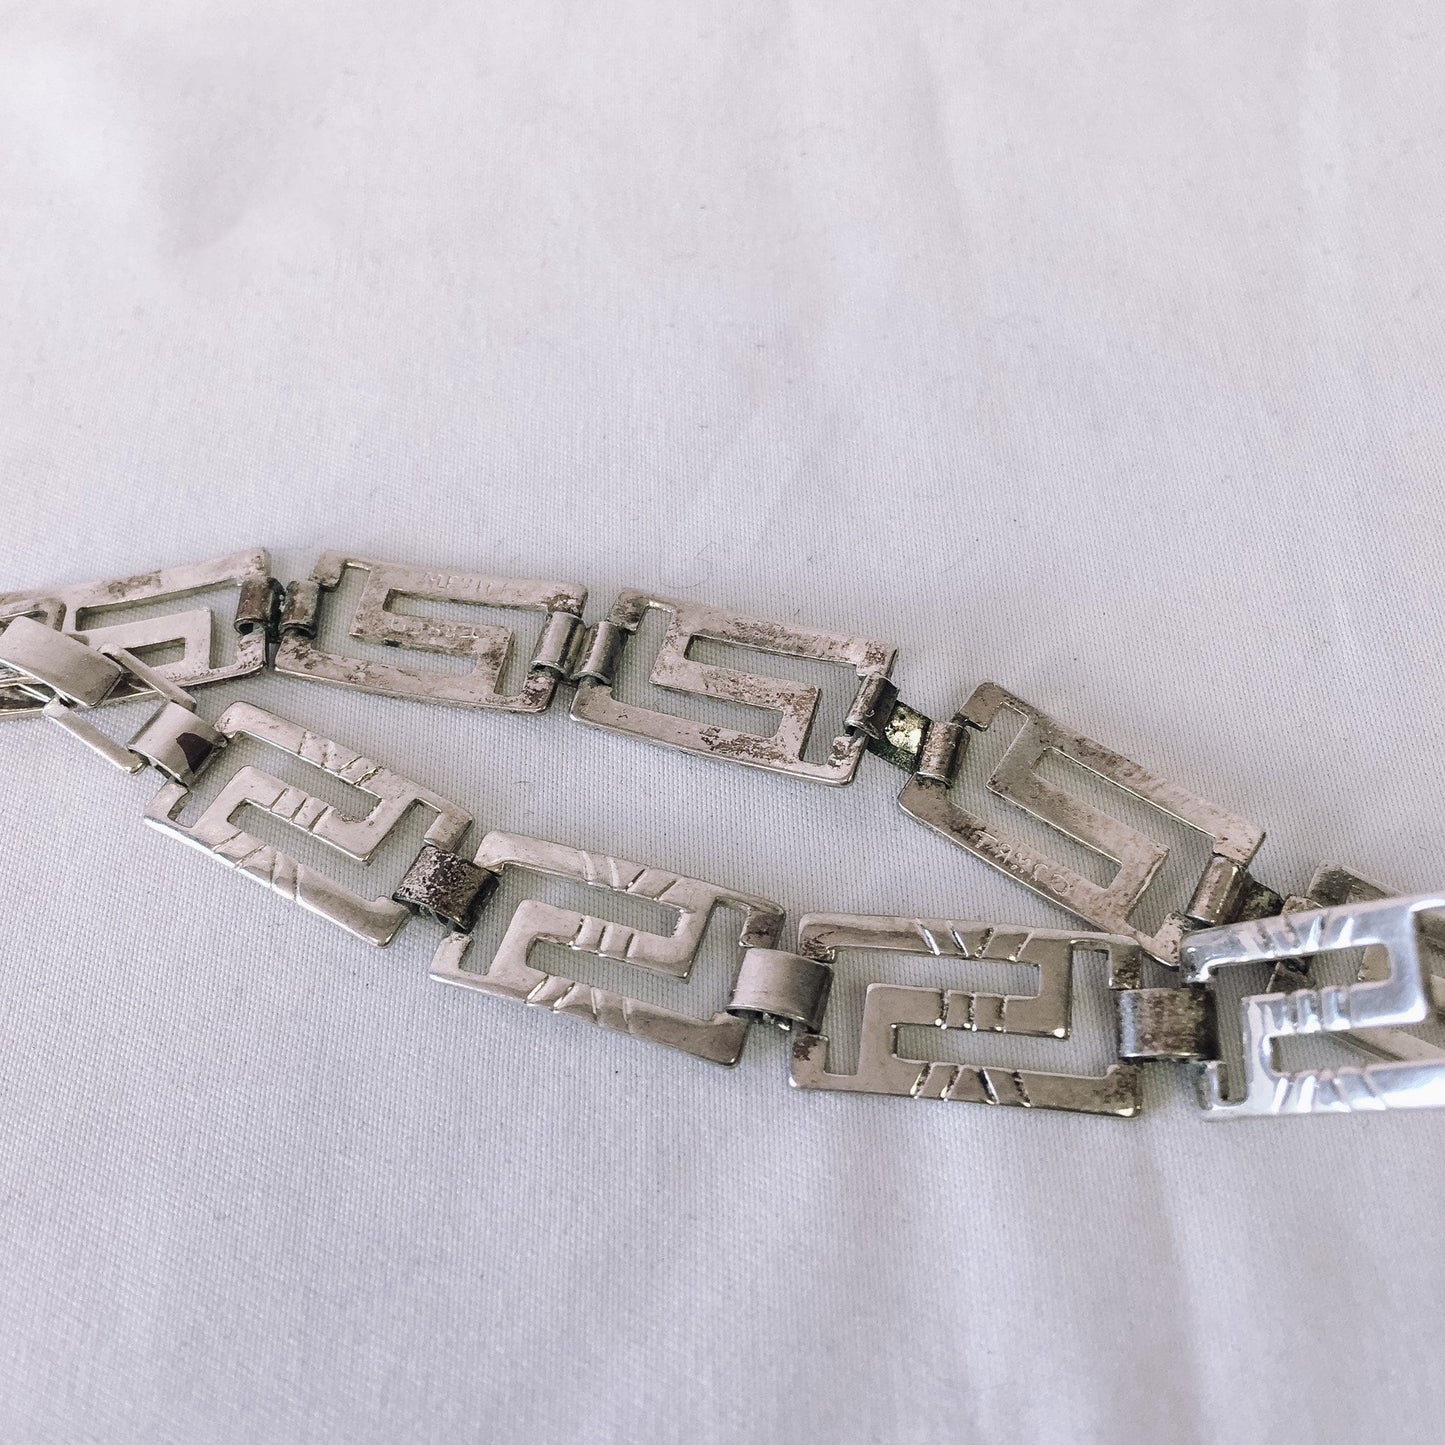 Vintage 925 Taxco Mexico Thin Panel Link Bracelet, Vintage Mexican Silver Jewelry